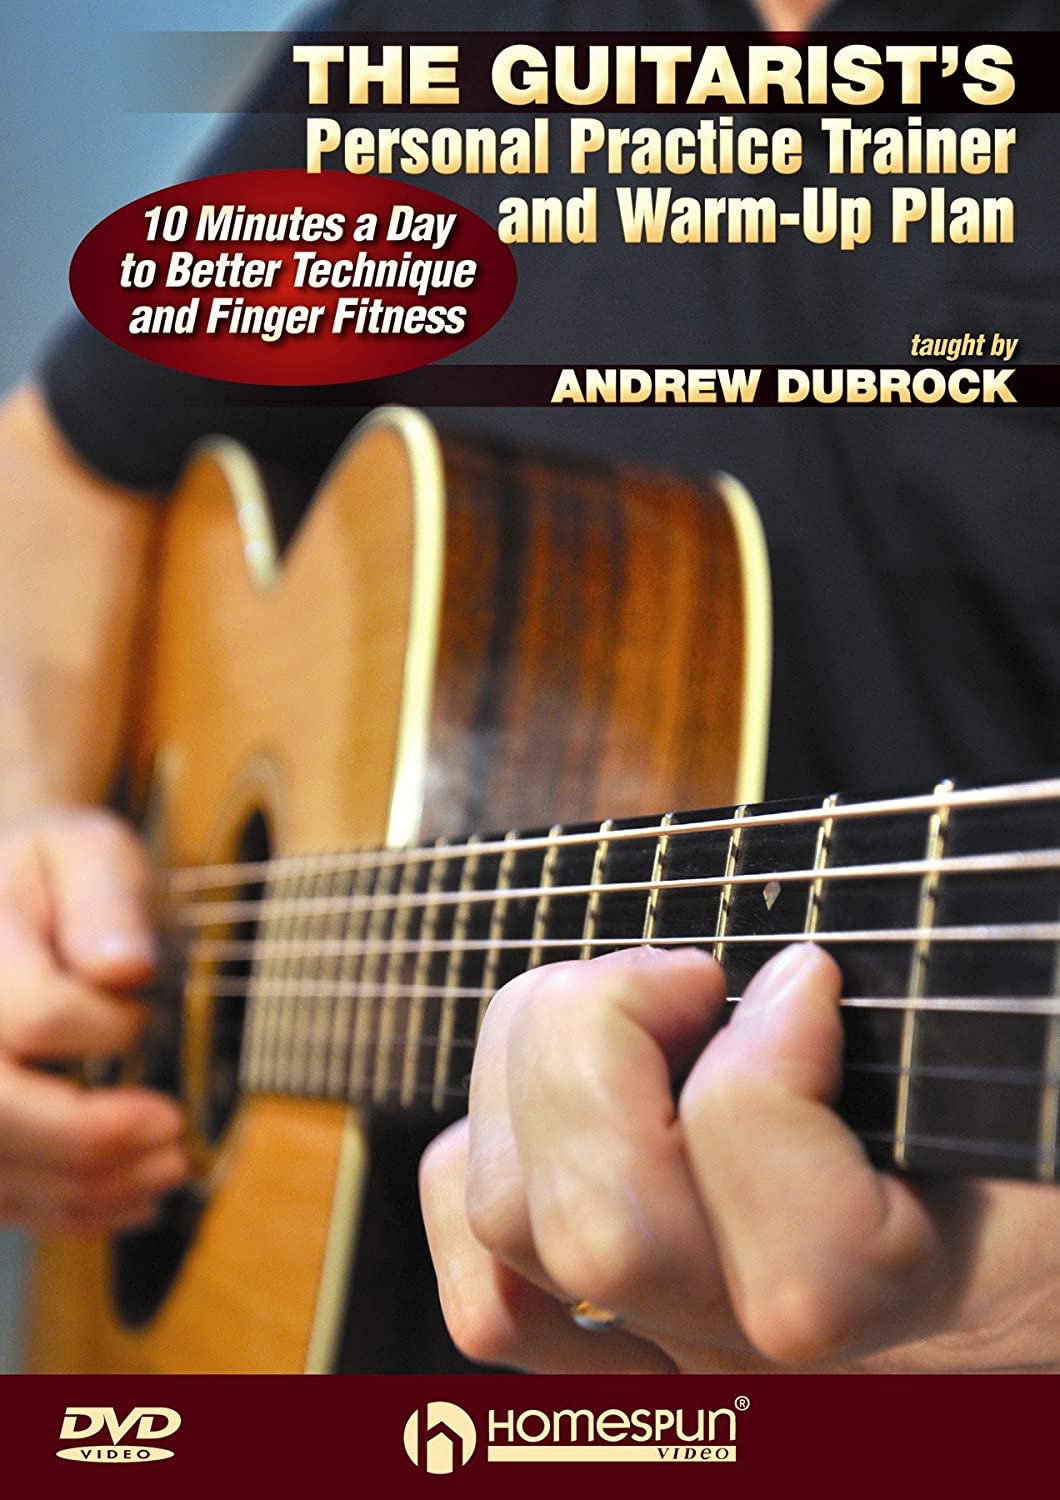 Andrew DuBrock - The Guitarist’s Personal Practice Trainer - 10 Min a Day to Better Technique & Finger Fitness